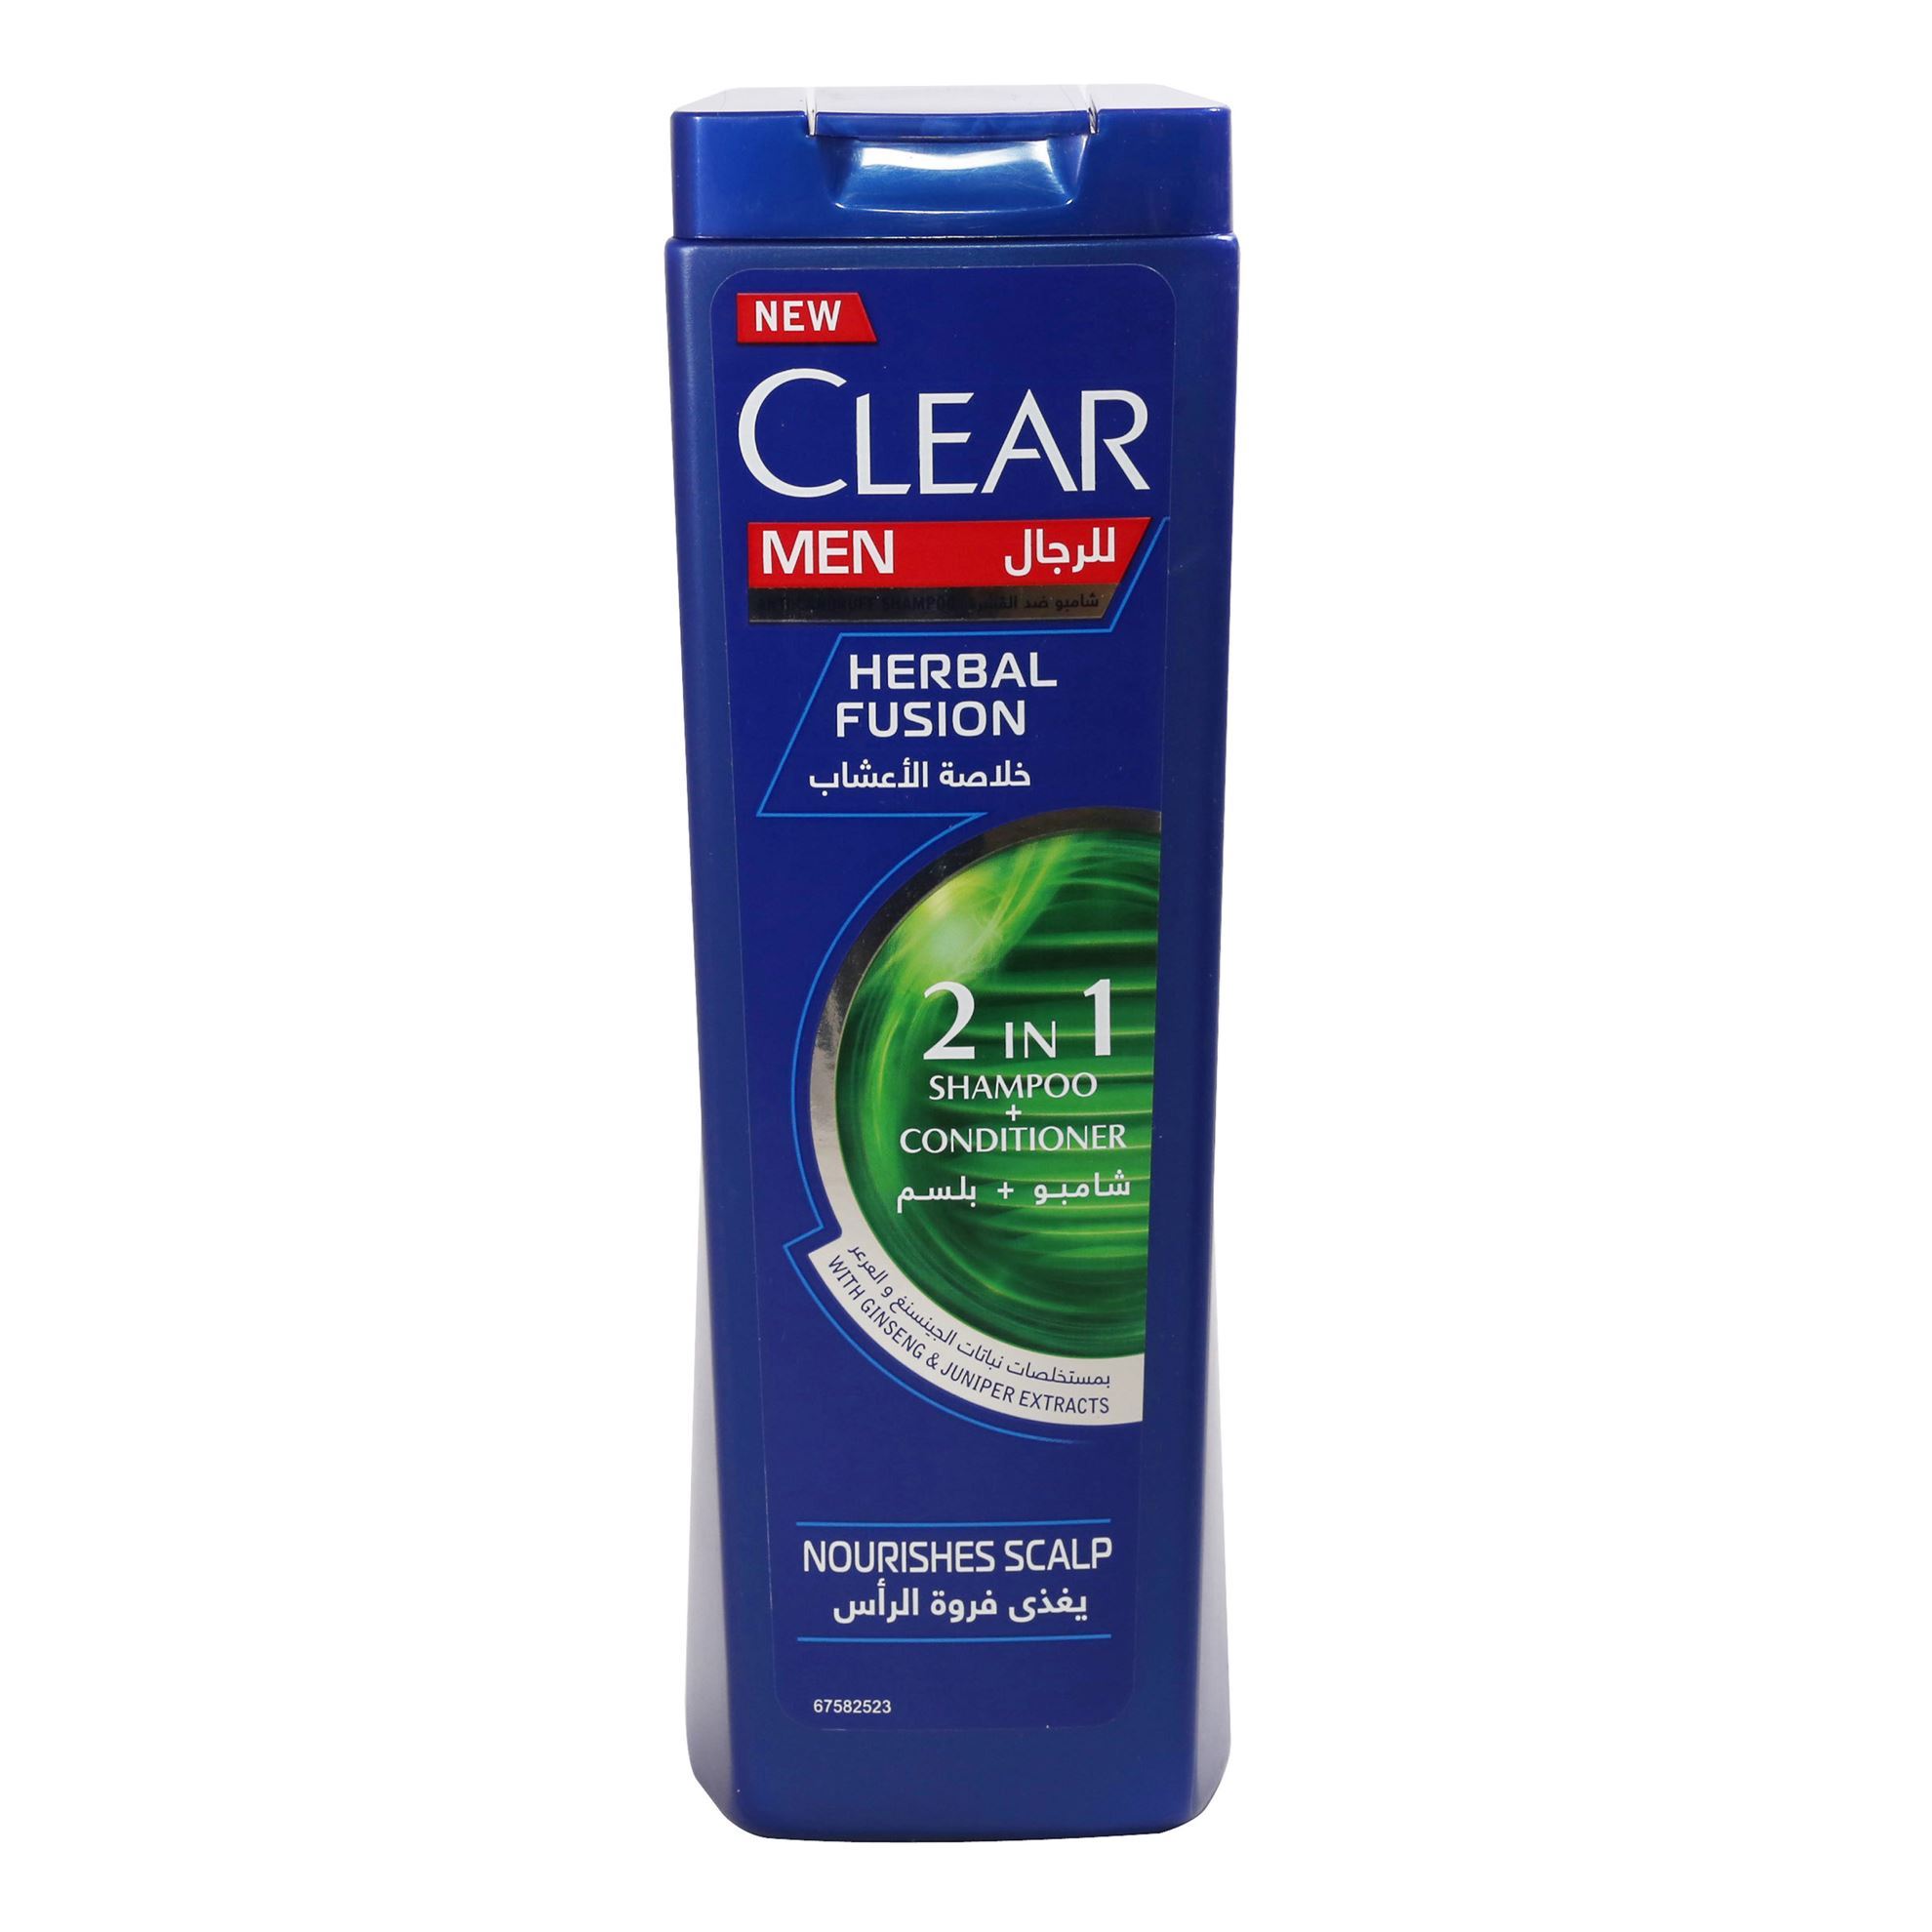 CLEAR 2 IN 1 SHAMPOO & CONDITIONER HERBAL FUSION FOR MEN 400 ML